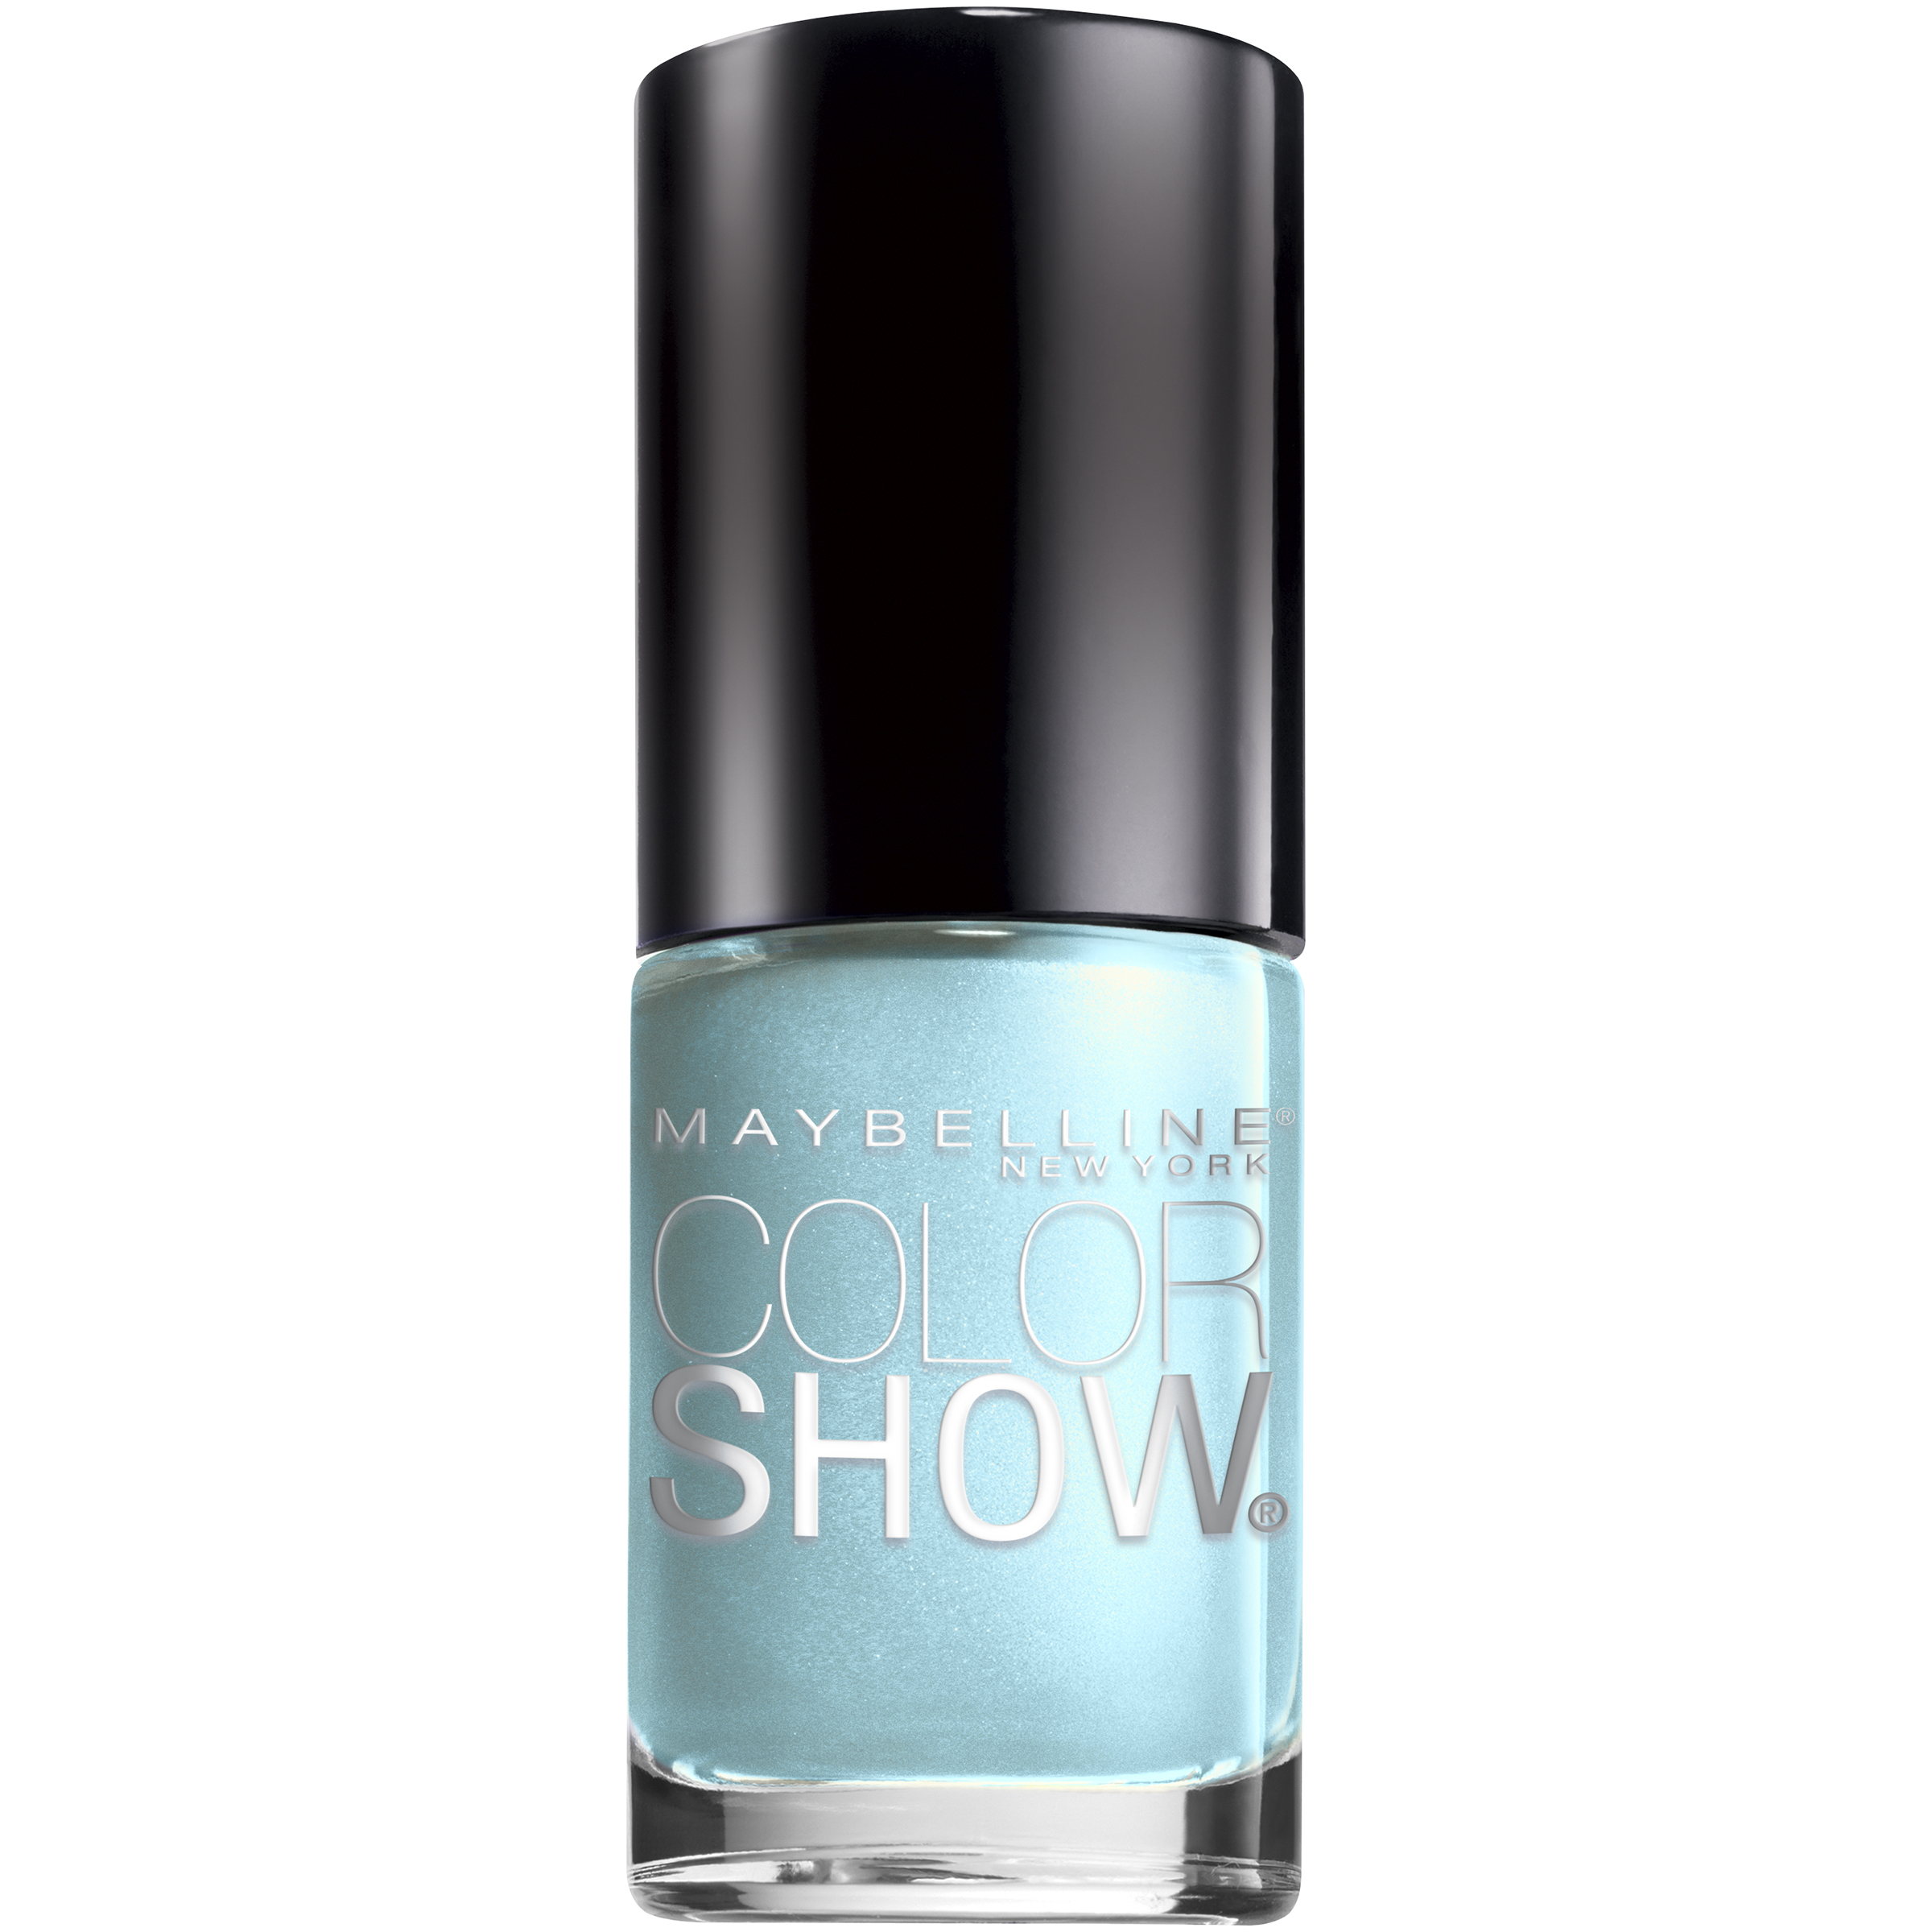 Maybelline New York Nail Lacquer, Frozen Over, 0.23 fl oz